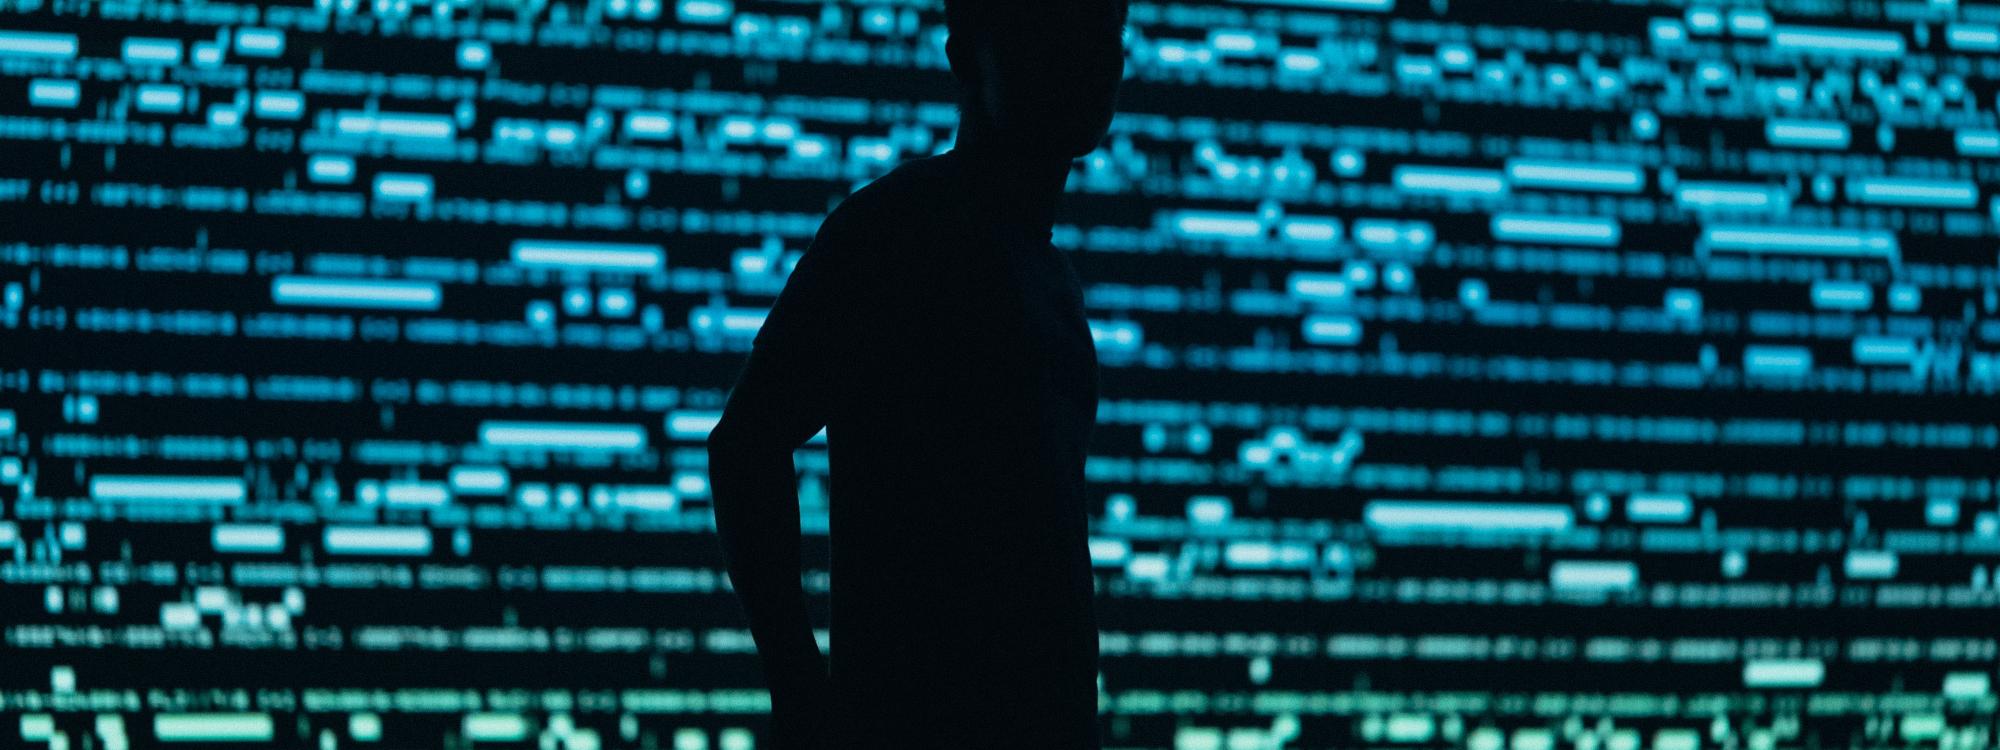 Shadow of man standing in front of computer text